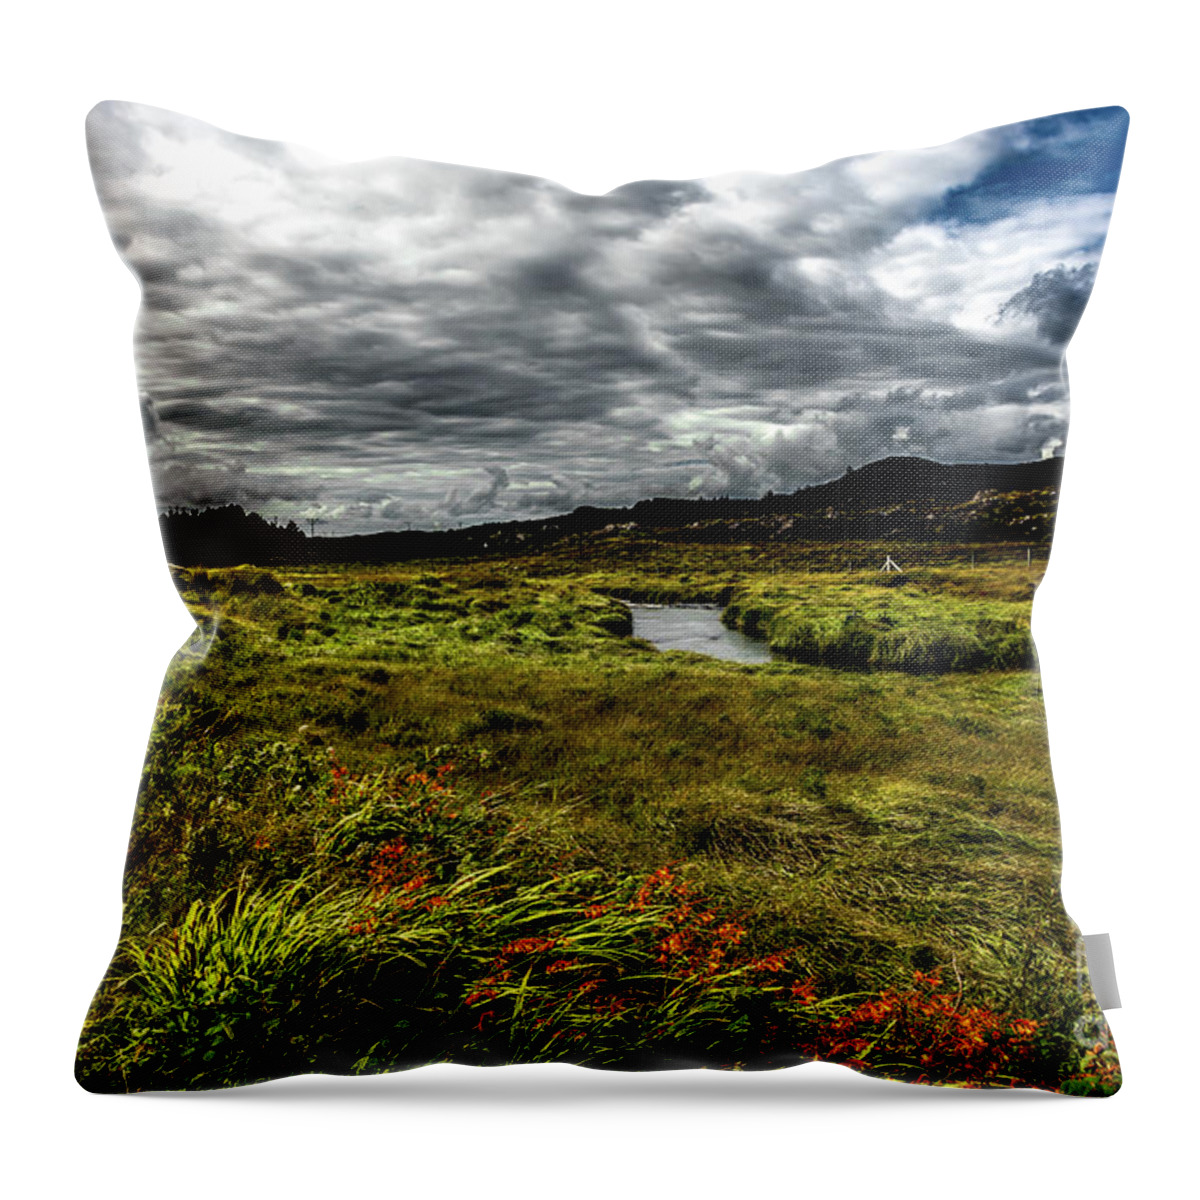 Ireland Throw Pillow featuring the photograph Remote Hut Beneath River in Ireland by Andreas Berthold